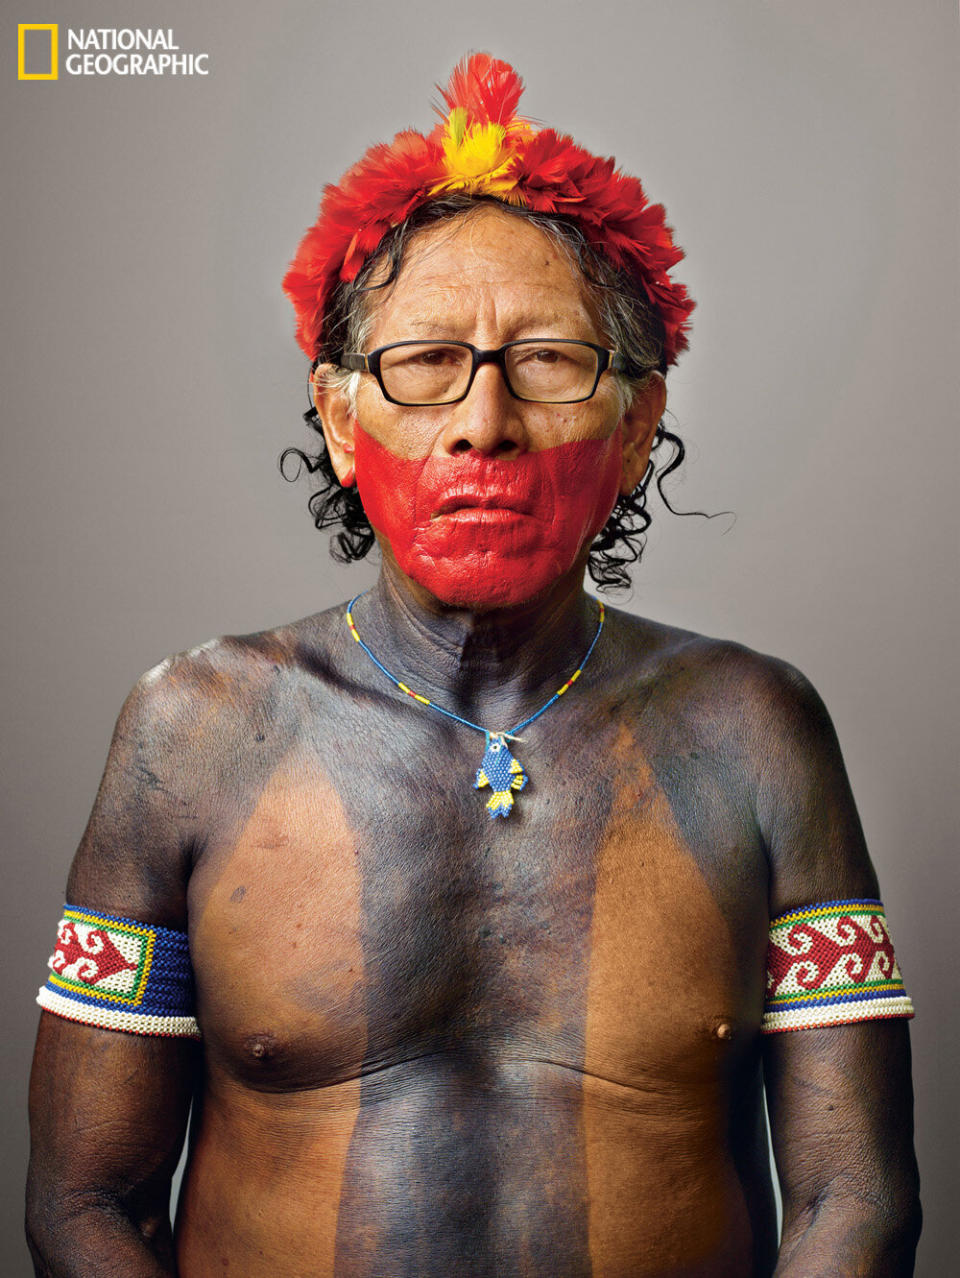 PUKATIRE, the powerful chief of Kendjam, wears body paint made from fruits, nuts, and charcoal.